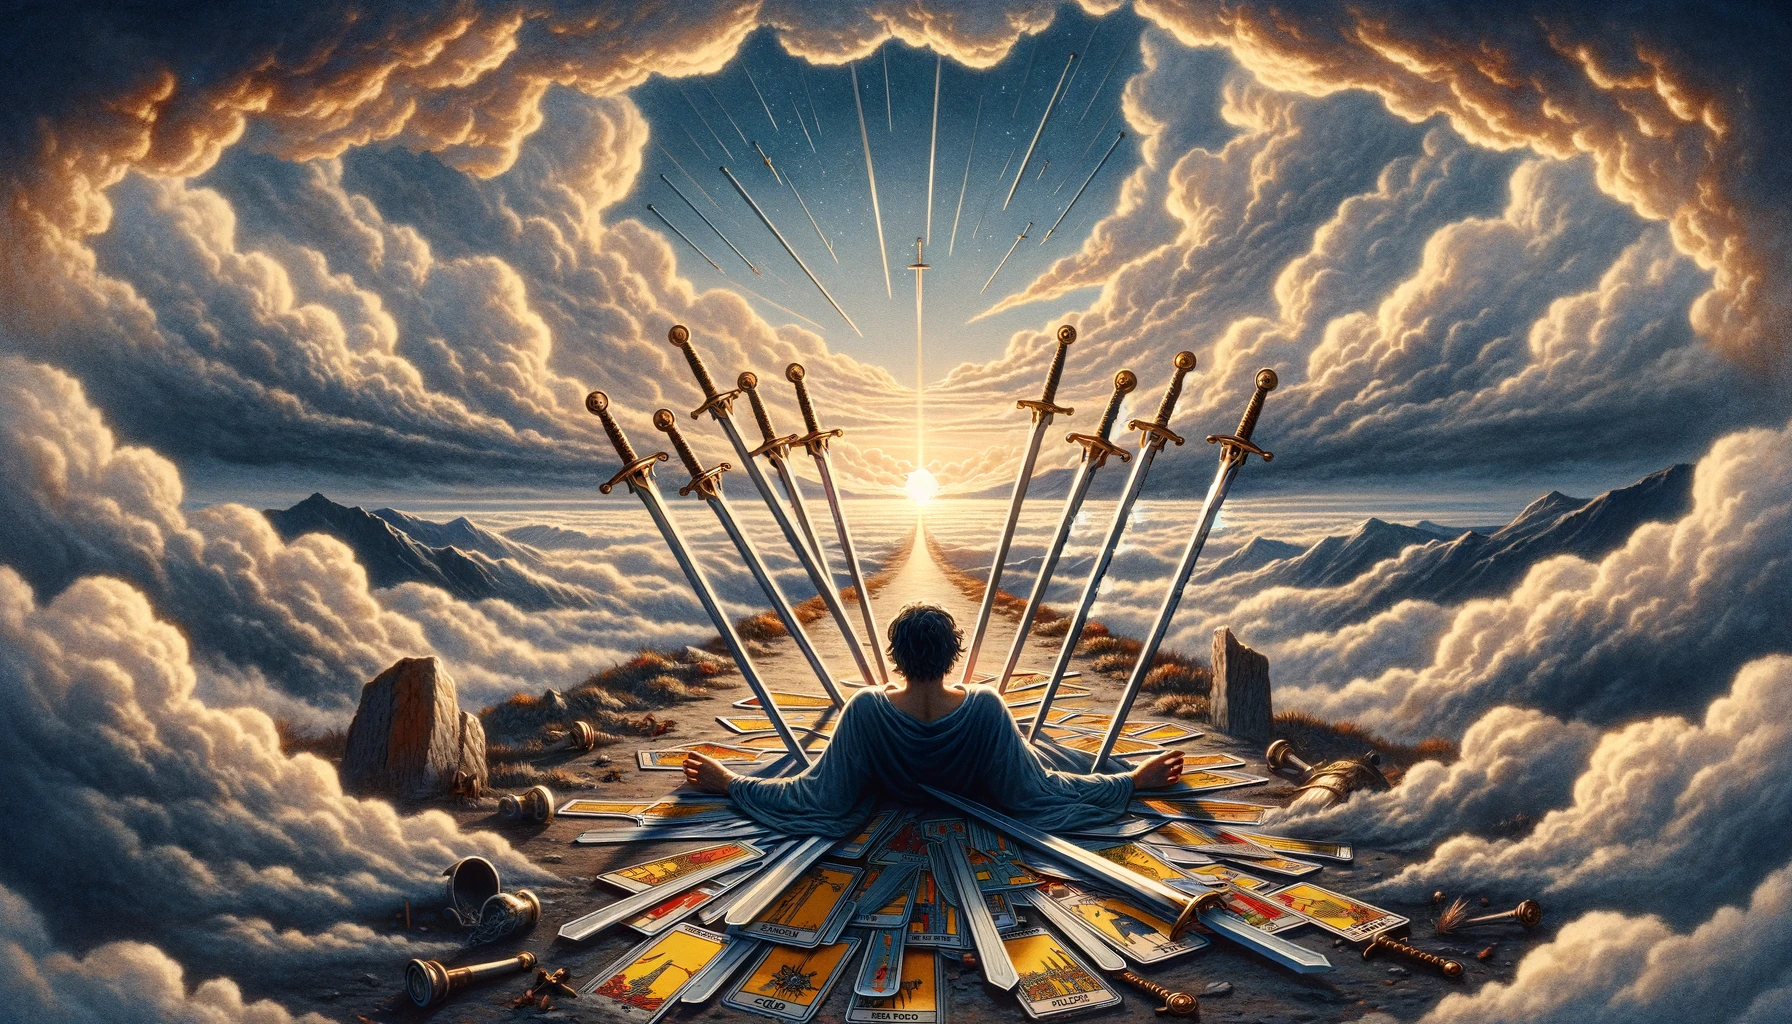 "The illustration portrays a figure standing amidst ten swords, signifying the acceptance of the end of a challenging cycle and the readiness for new beginnings. With their gaze directed towards the horizon, it symbolizes hope, renewal, and the courage to embrace the possibilities of the future."